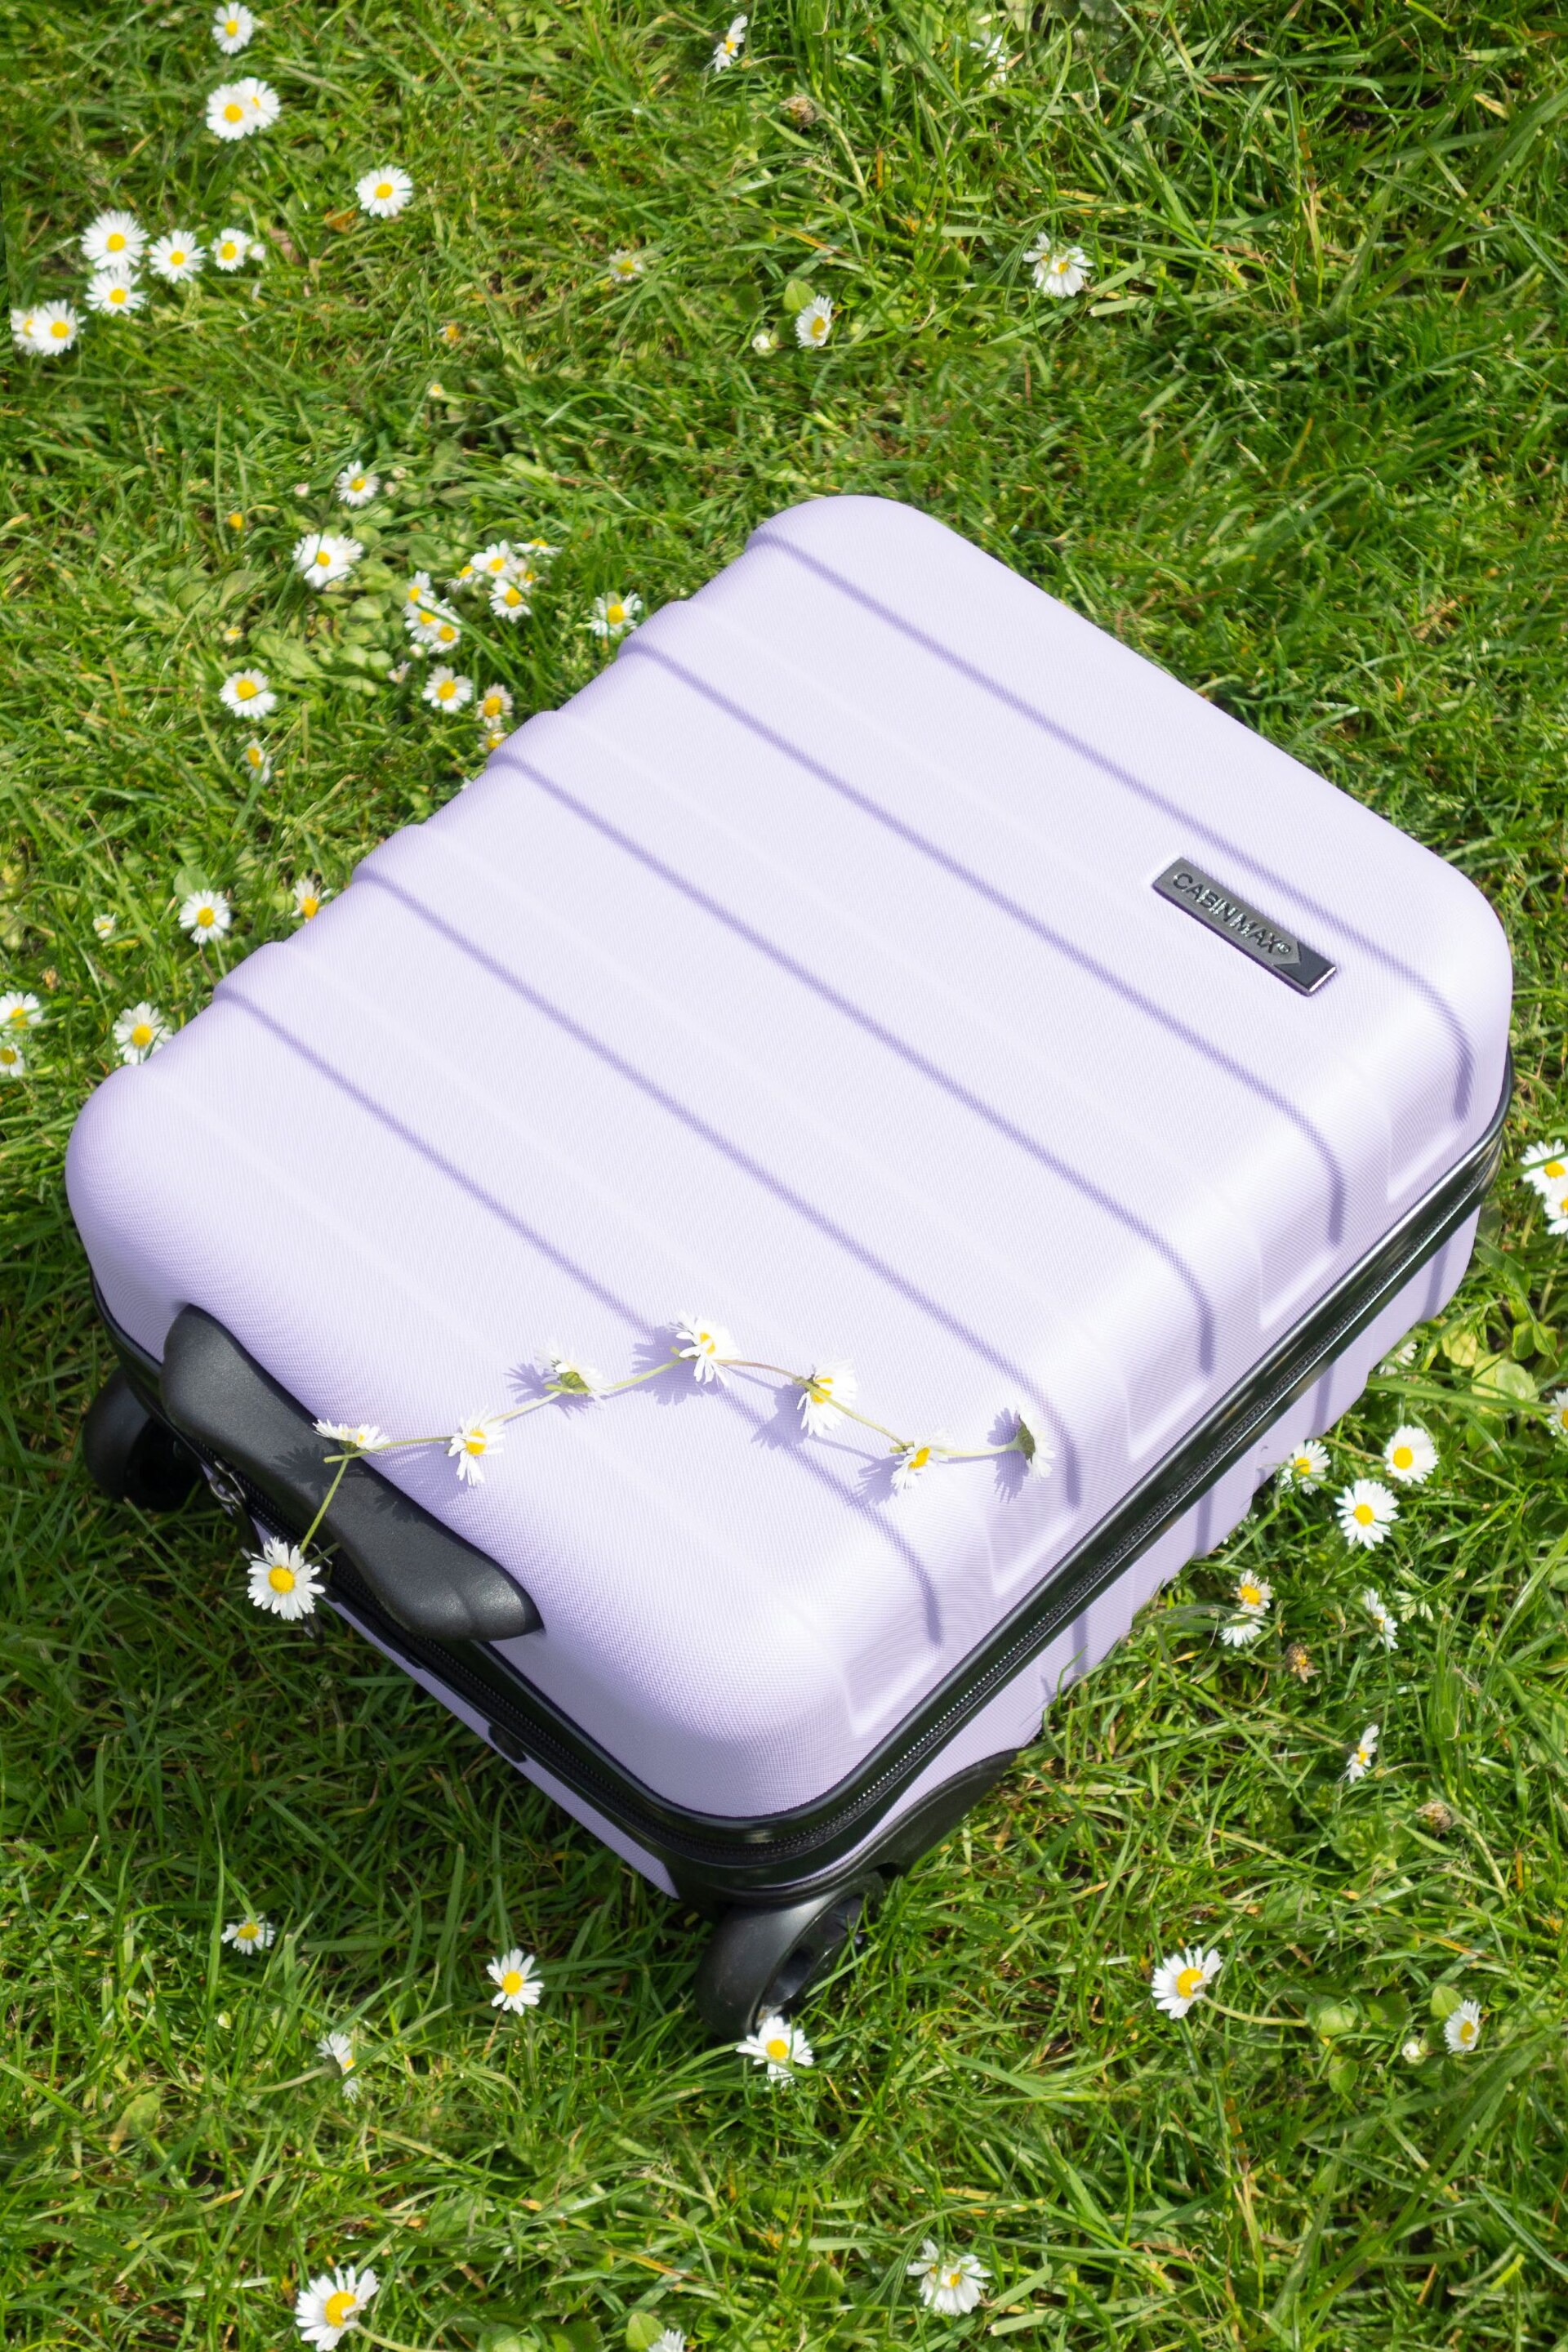 Cabin Max Anode Two Wheel Carry On Underseat 45cm Suitcase - Image 5 of 6